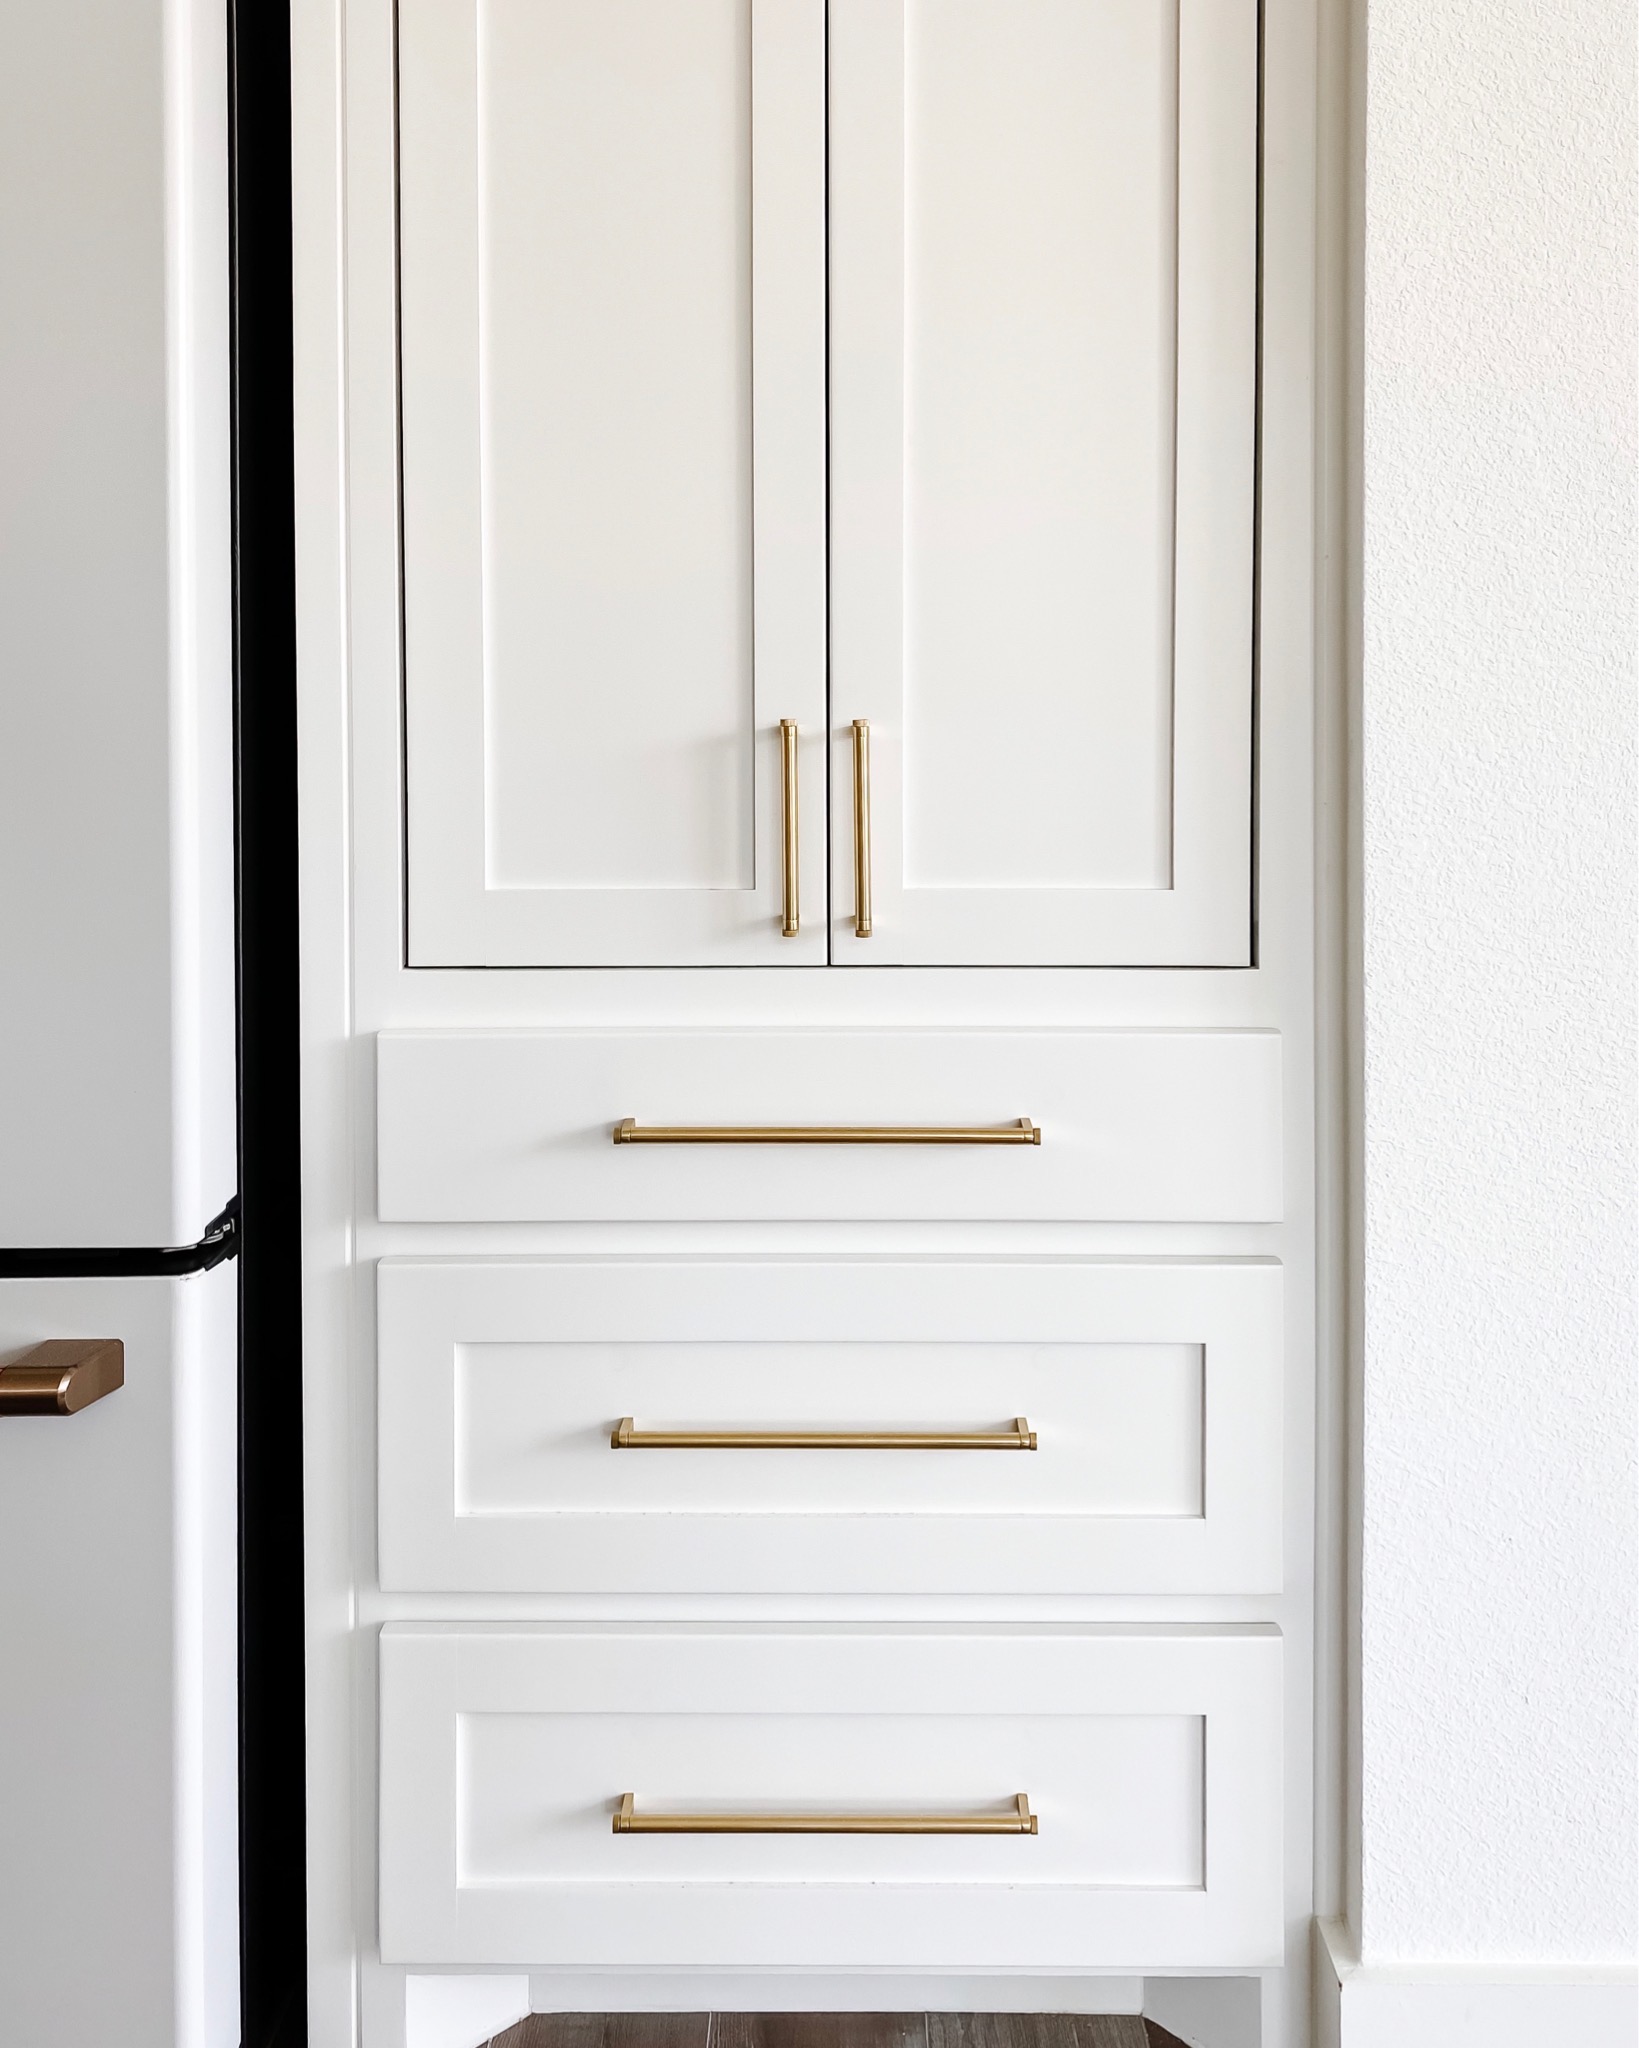 Custom appliance garage with sliding doors, pot and pan drawers and more to hide all those big bulky appliances in a kitchen. Finished with brass Rejuvenation West Slope drawer pulls